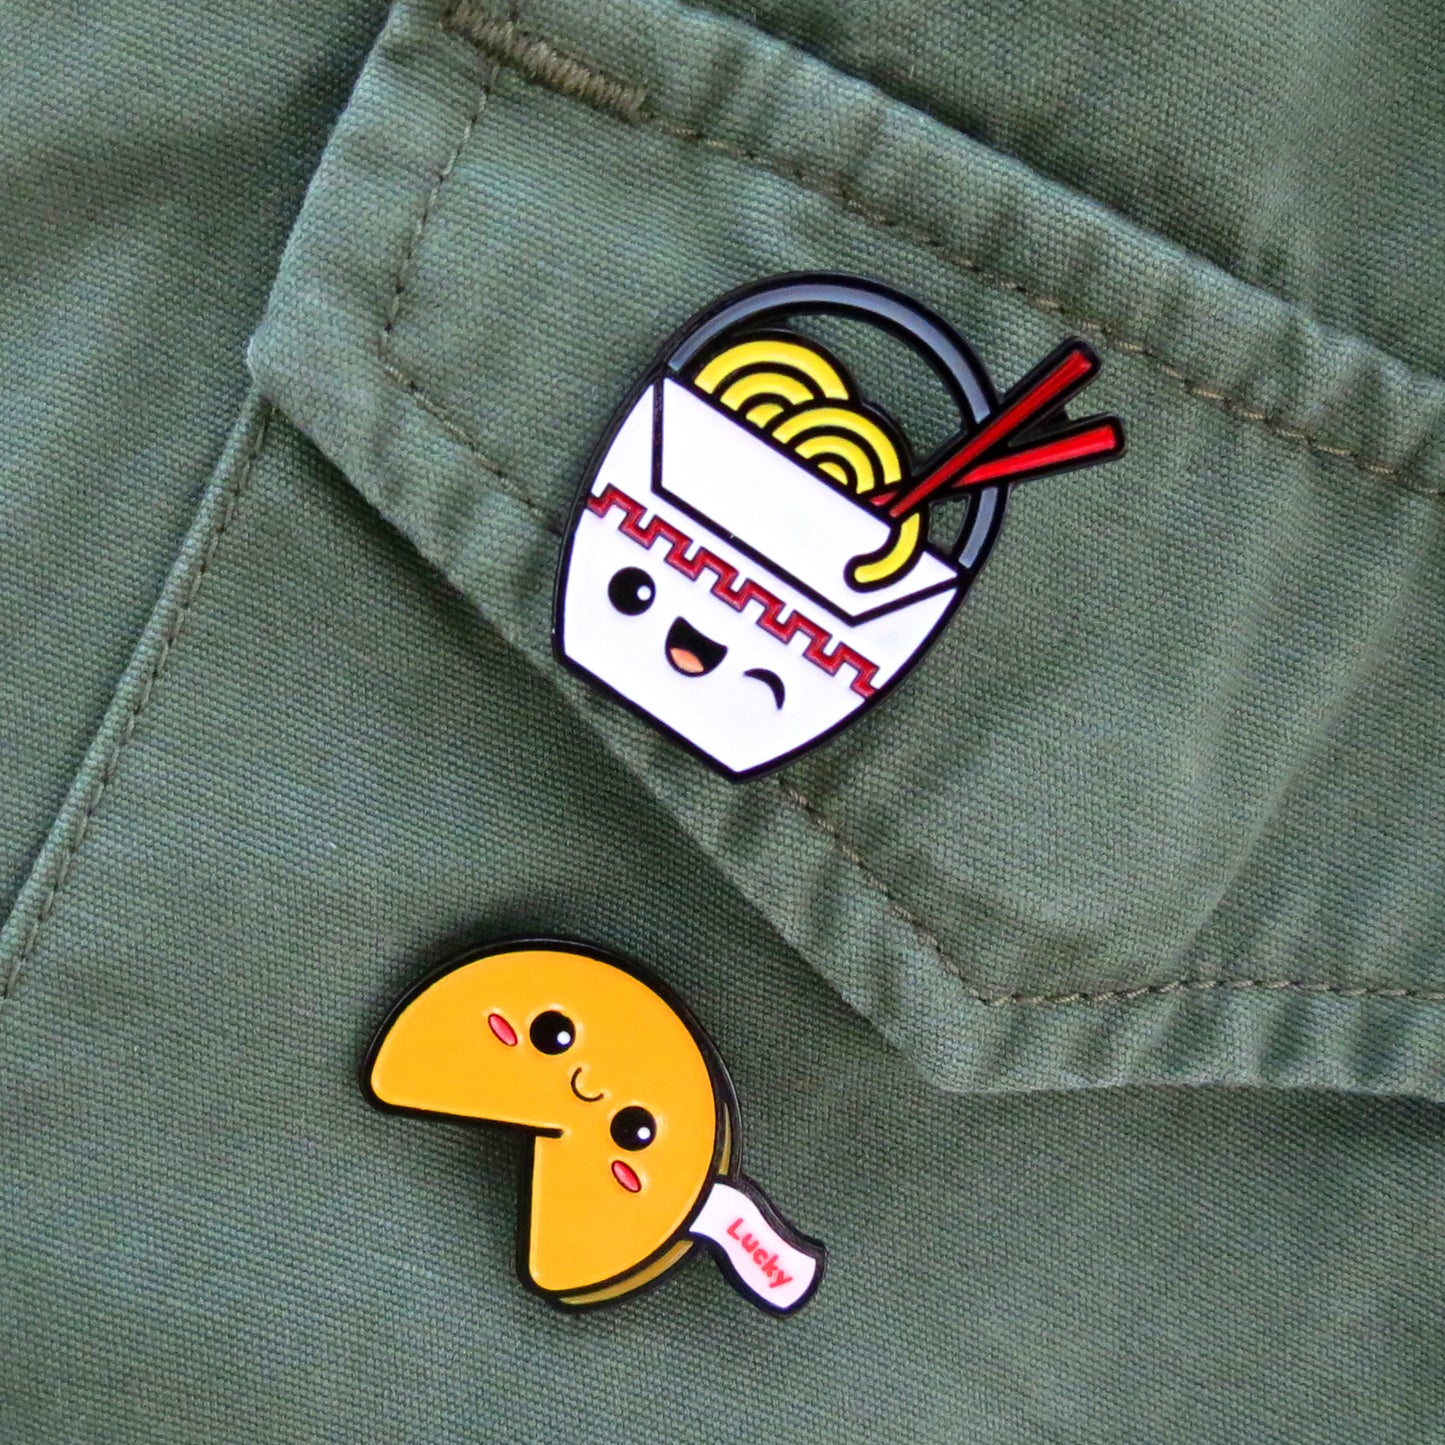 Chinese Takeout and Fortune Cookie enamel pins on olive green canvas jacket pocket